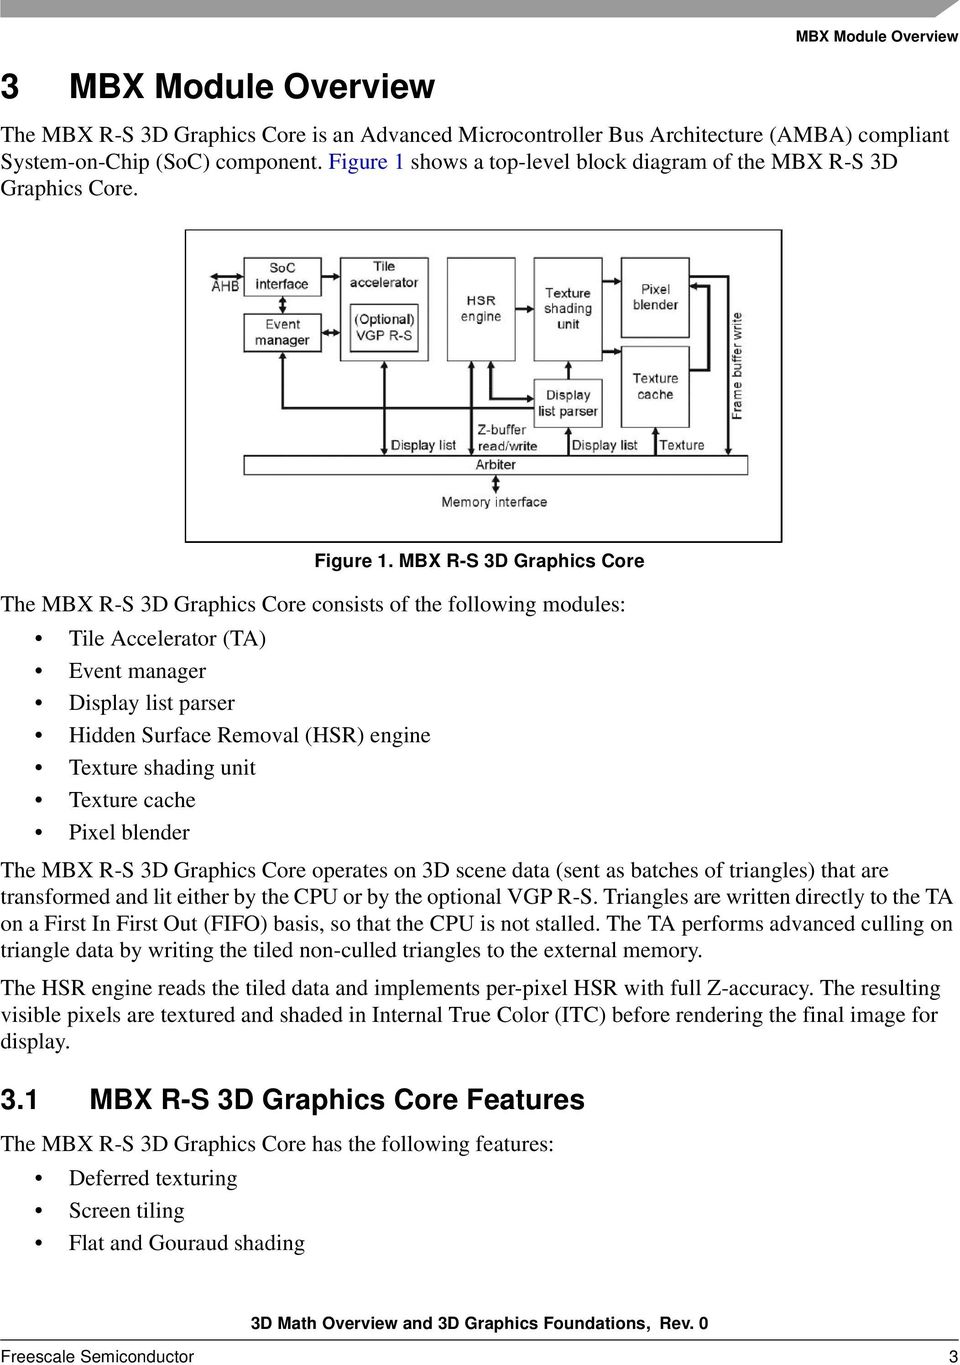 MBX R-S 3D Graphics Core The MBX R-S 3D Graphics Core consists of the following modules: Tile Accelerator (TA) Event manager Display list parser Hidden Surface Removal (HSR) engine Texture shading